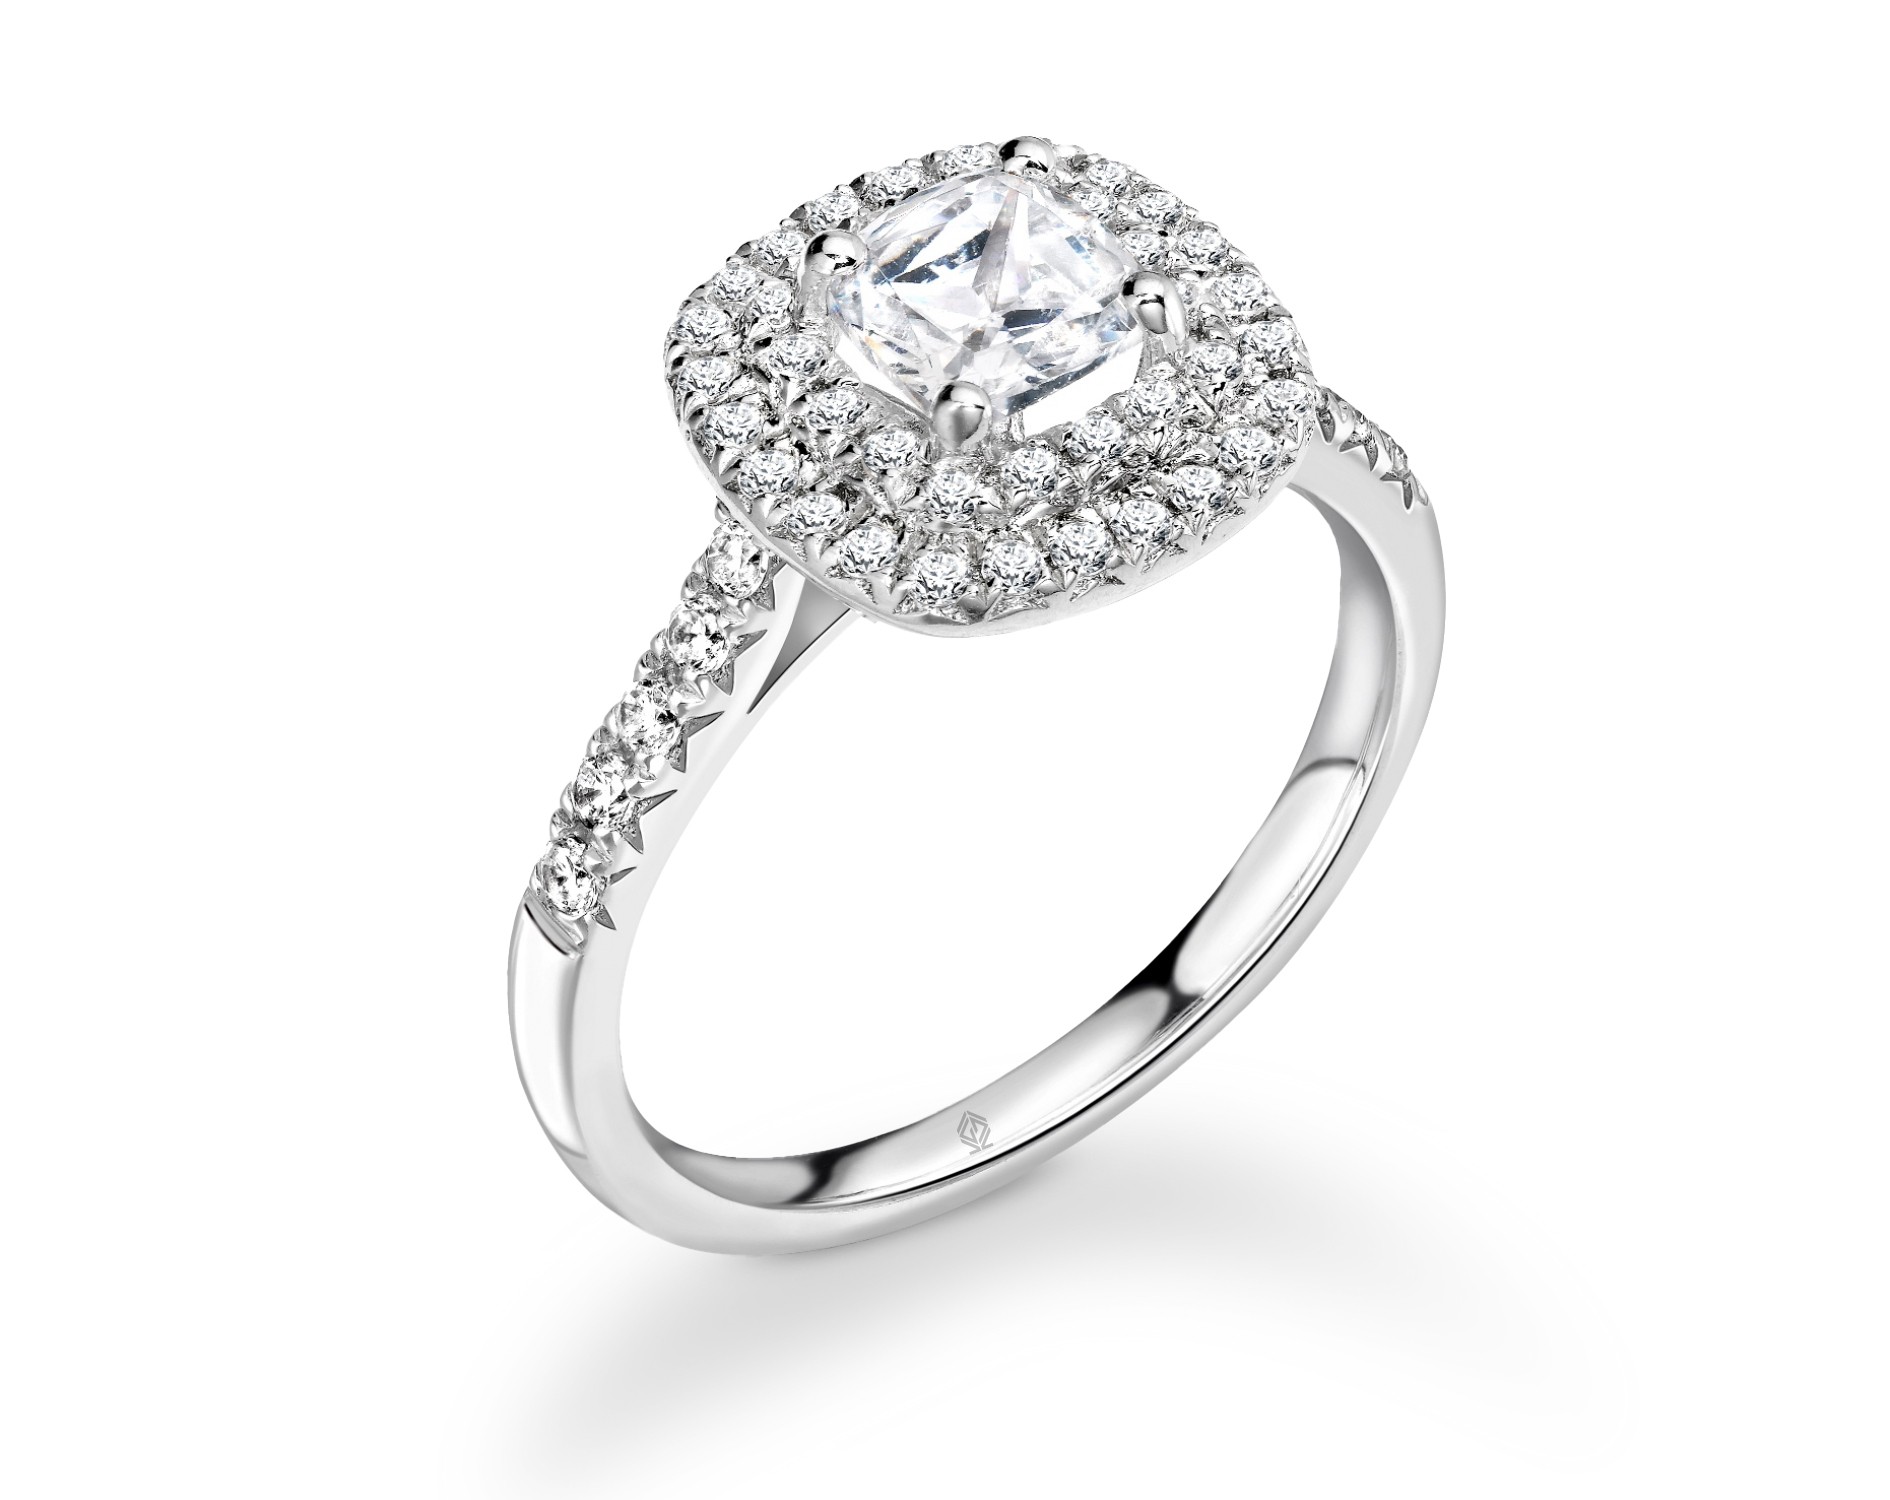 18K WHITE GOLD DOUBLE HALO CUSHION CUT DIAMOND ENGAGEMENT RING WITH SIDE STONES PAVE SET